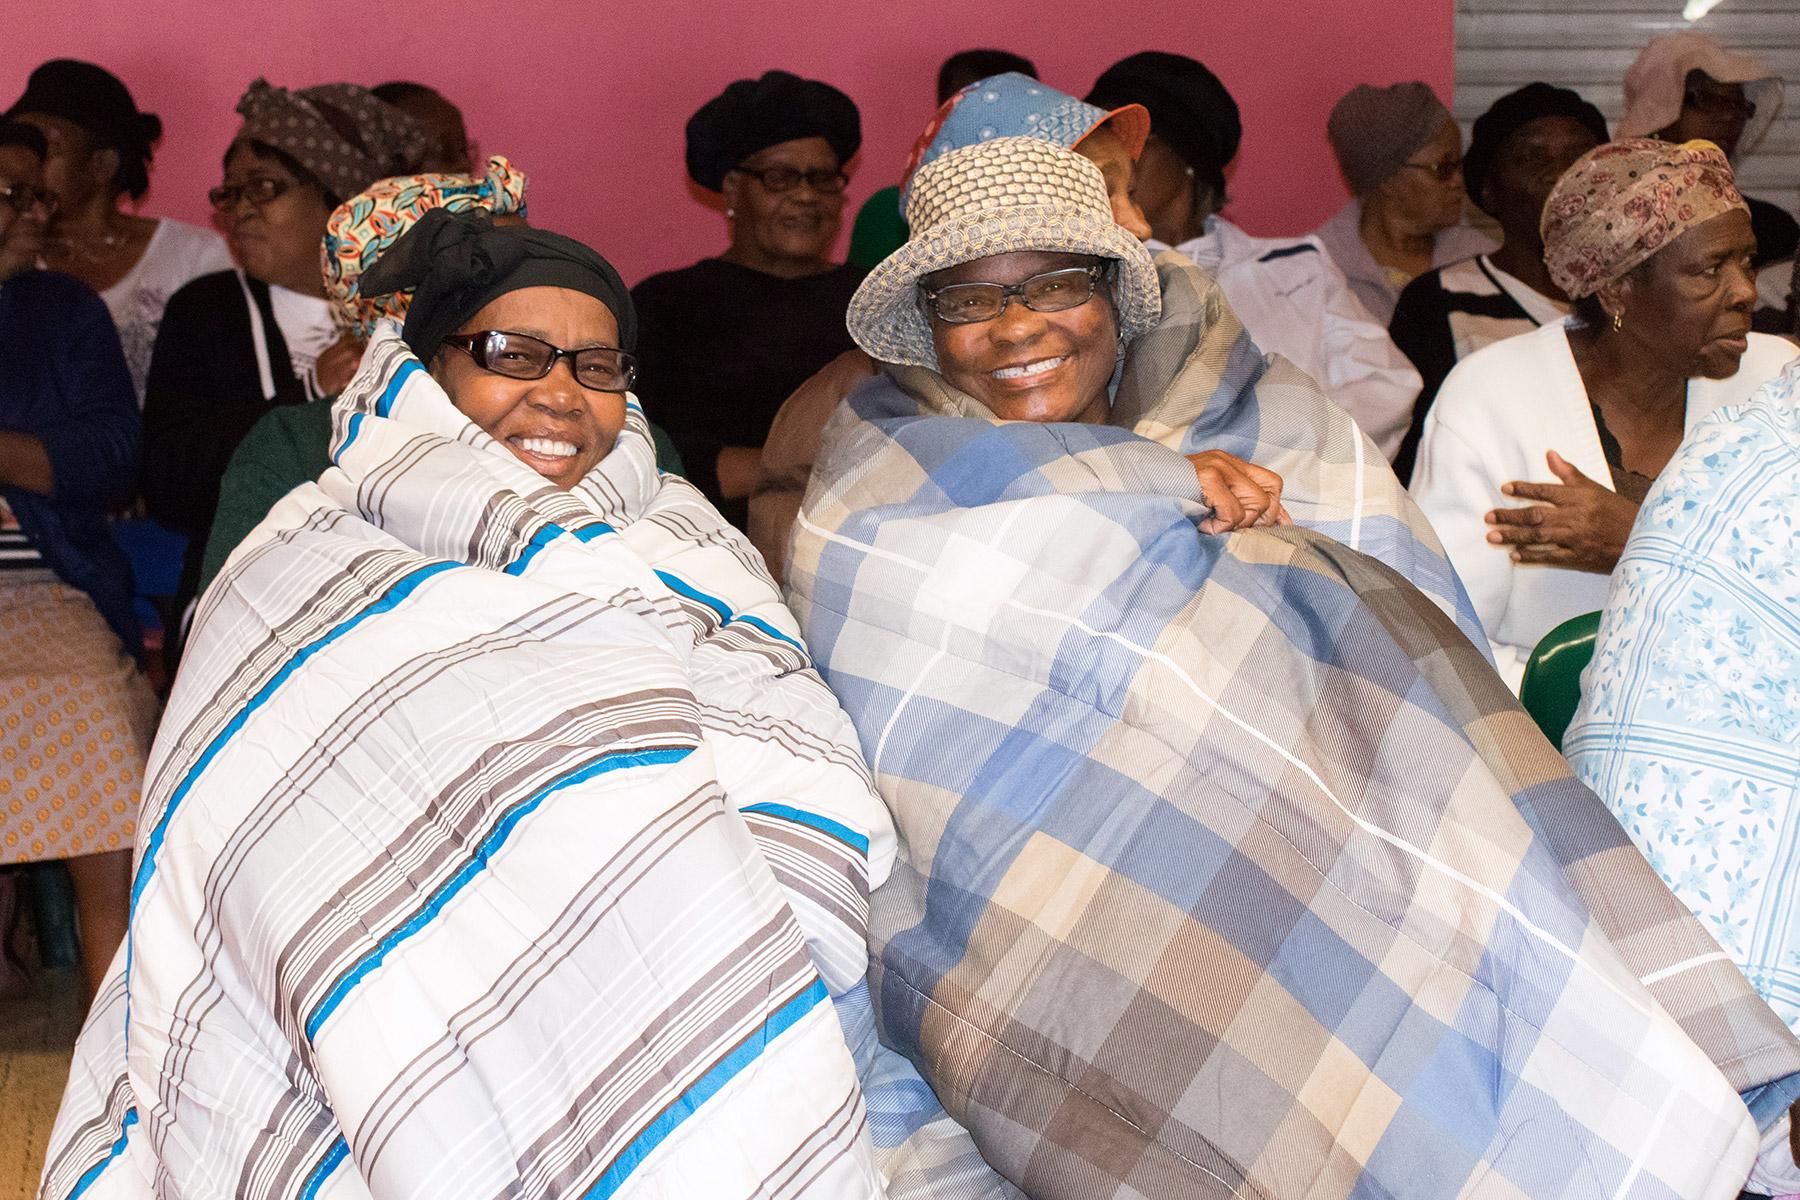 Quilts are handed out to the Busiswe Luncheon Club, South Africa. The club is a group of elderly who meet daily to sing, share meals, and support each other while their families are working and in school. All photos: CLWR